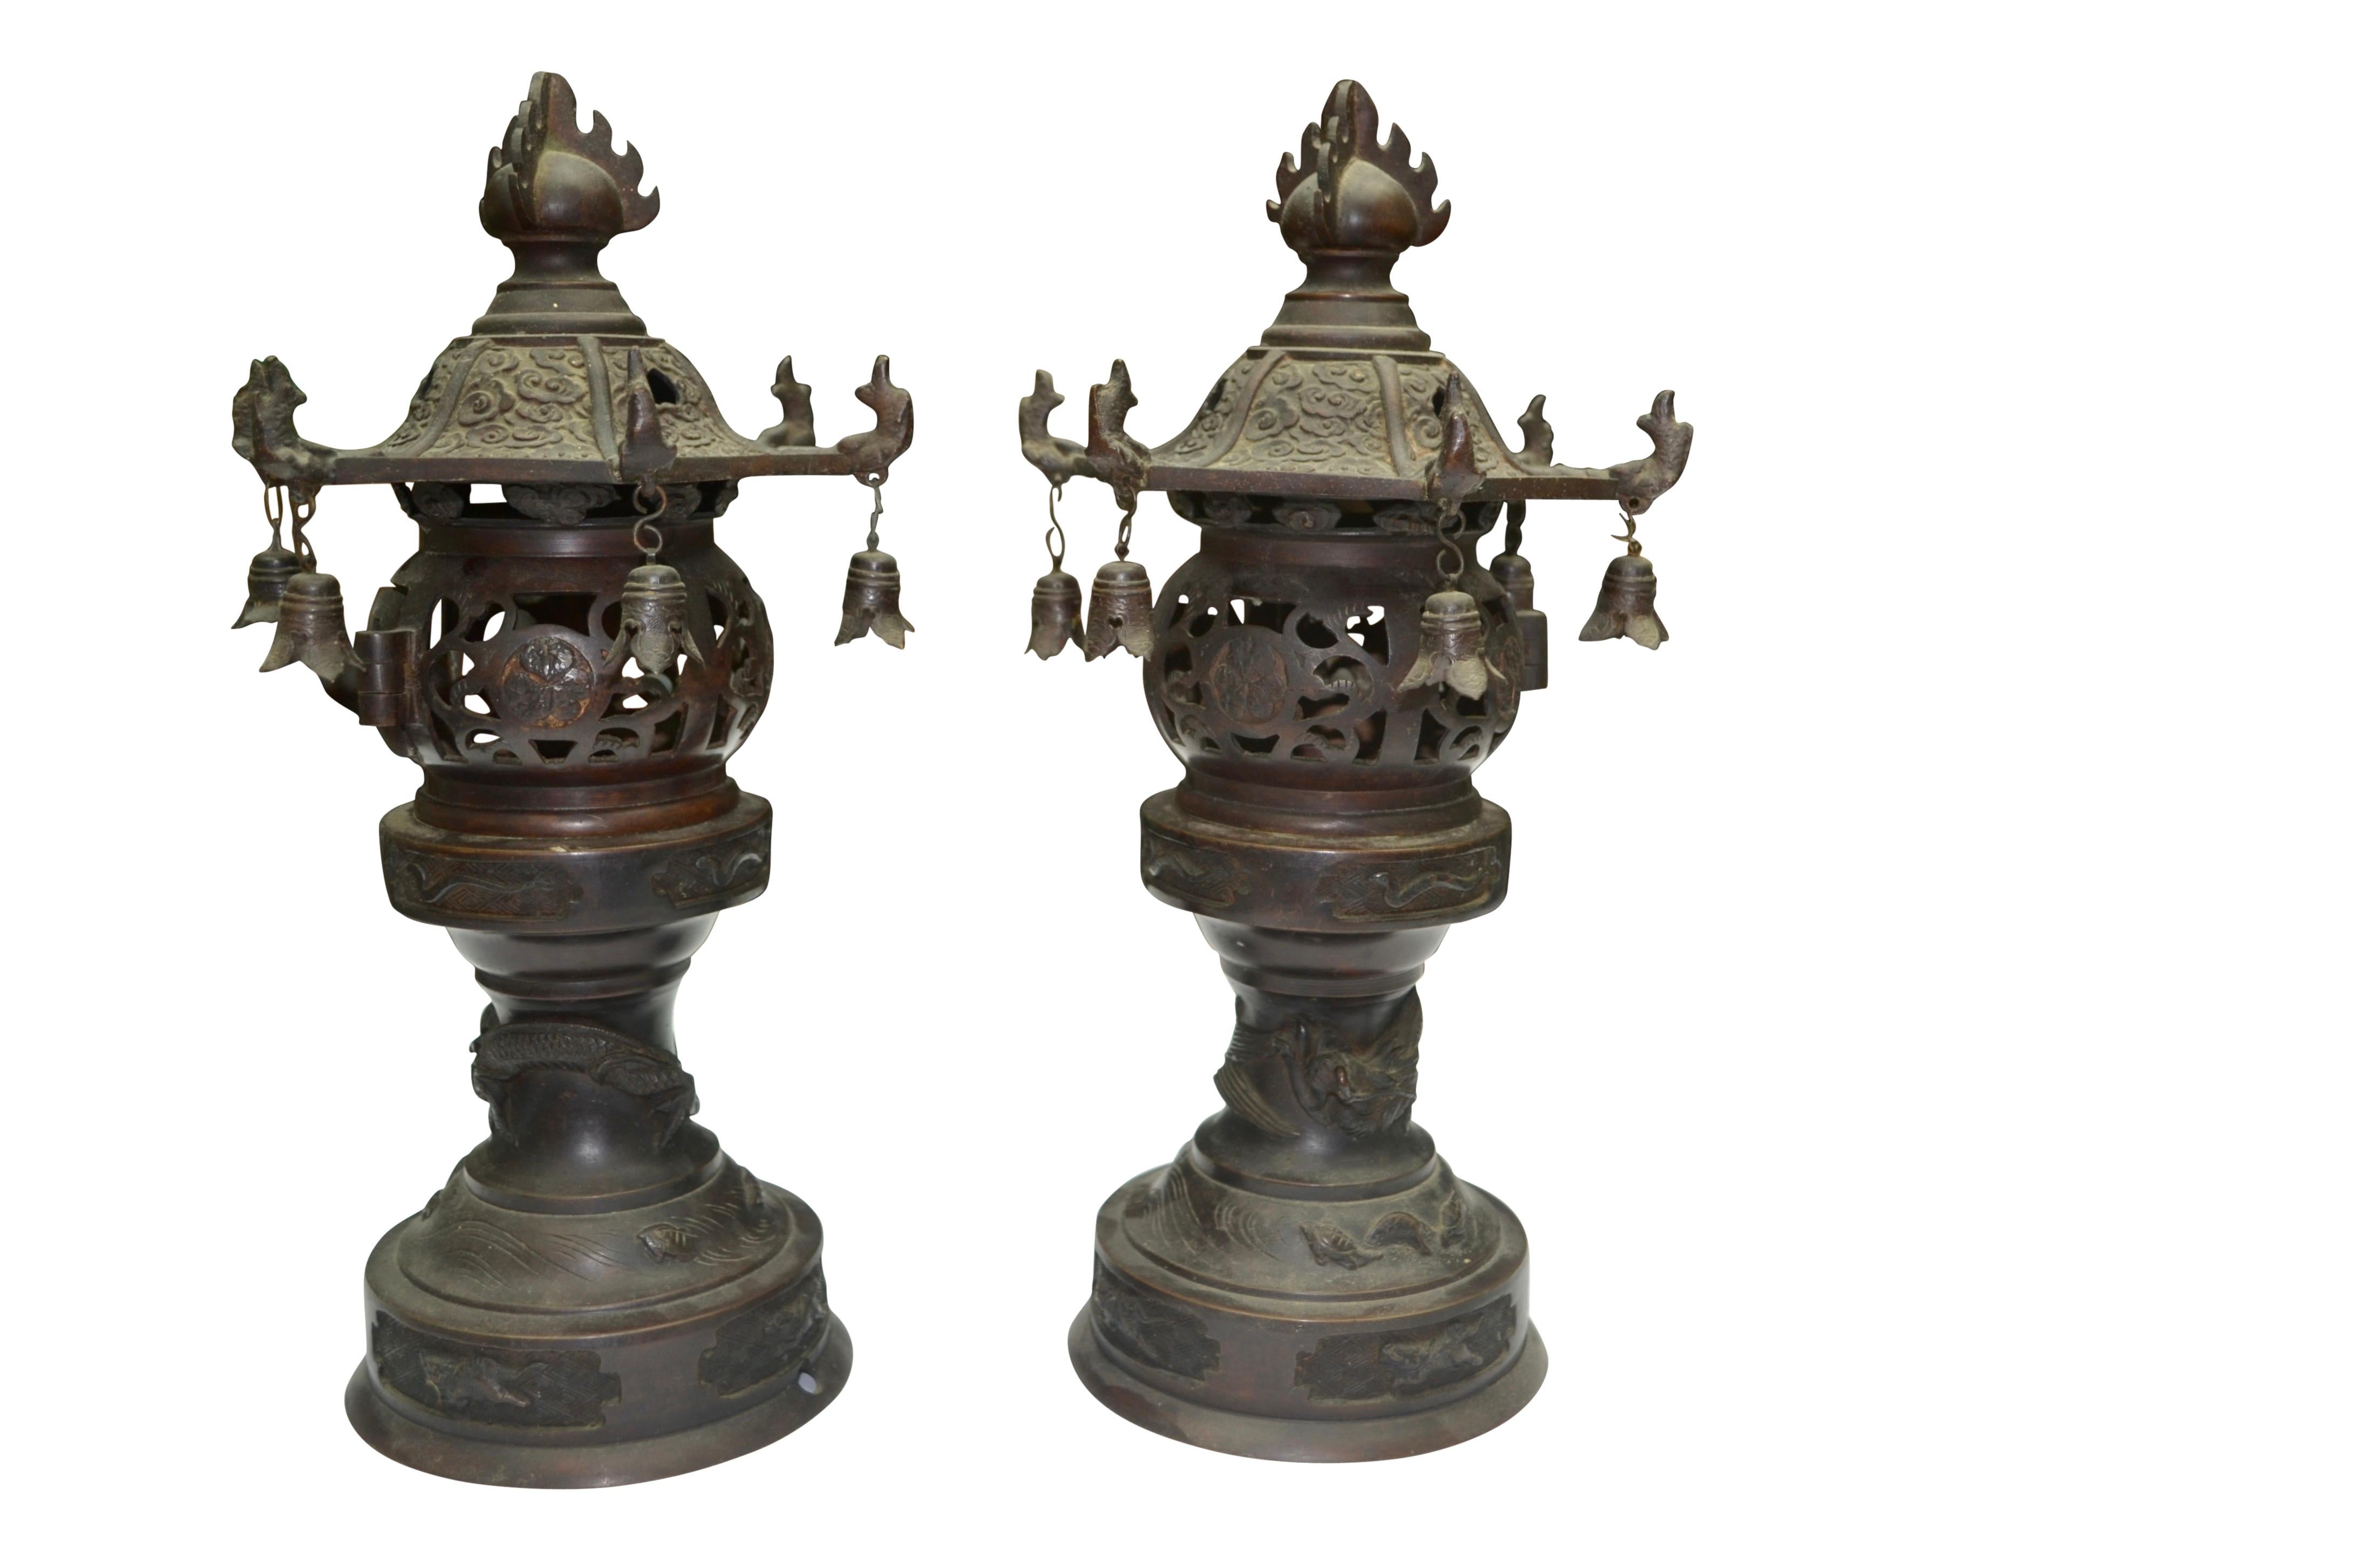 Japanese Pair of Qing Dynasty Patinated Bronze Censors/Perfume Burners